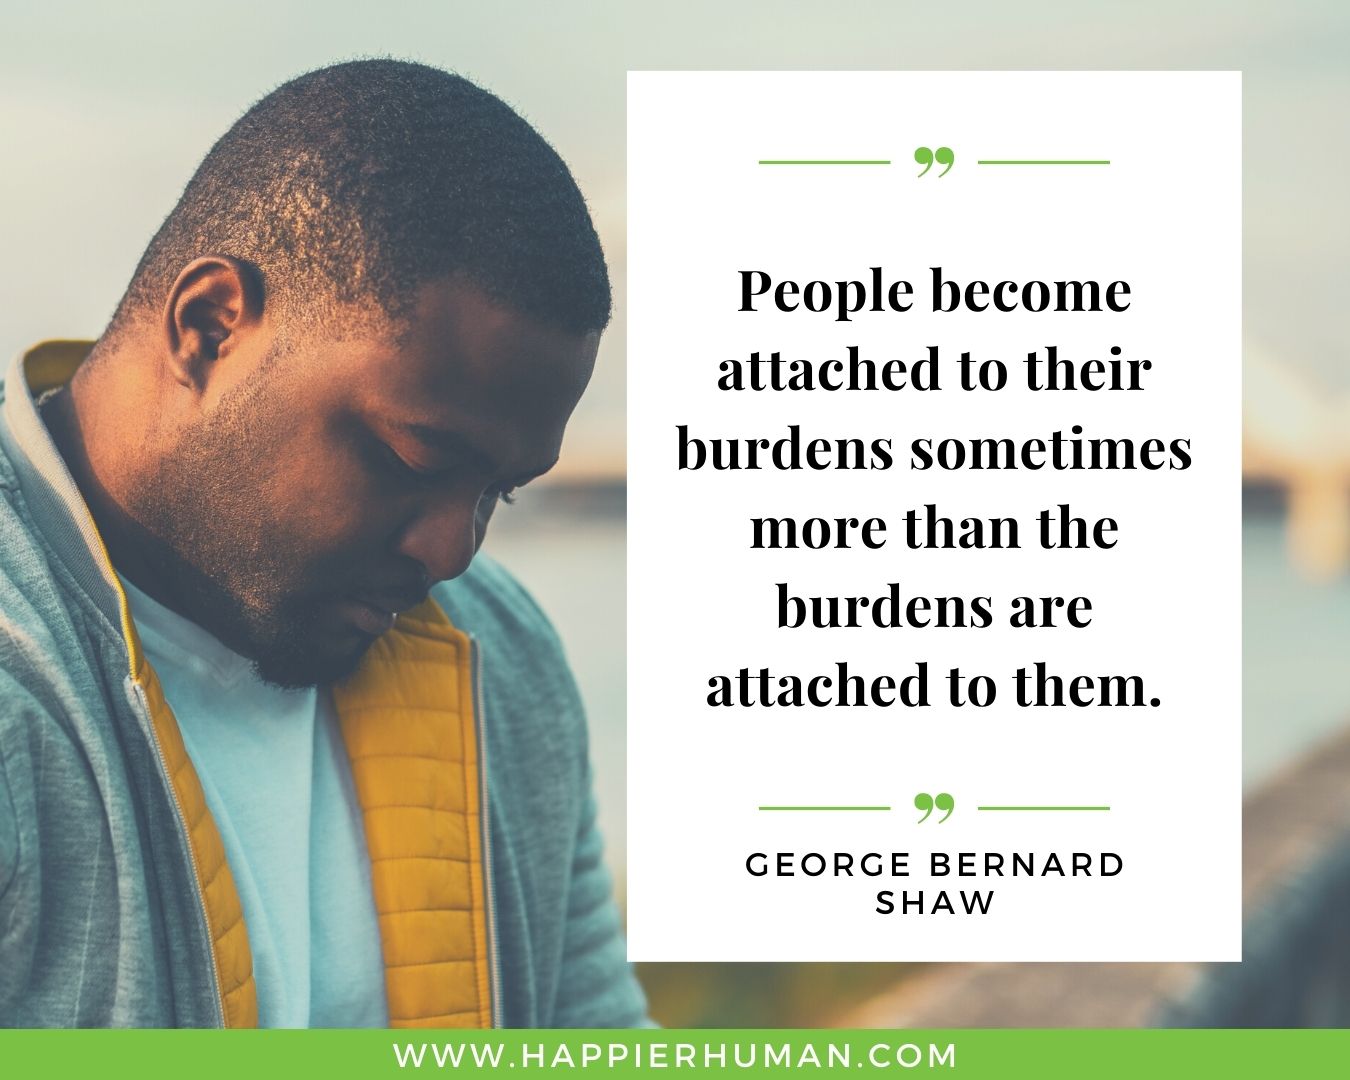 Overthinking Quotes - "People become attached to their burdens sometimes more than the burdens are attached to them.” - George Bernard Shaw